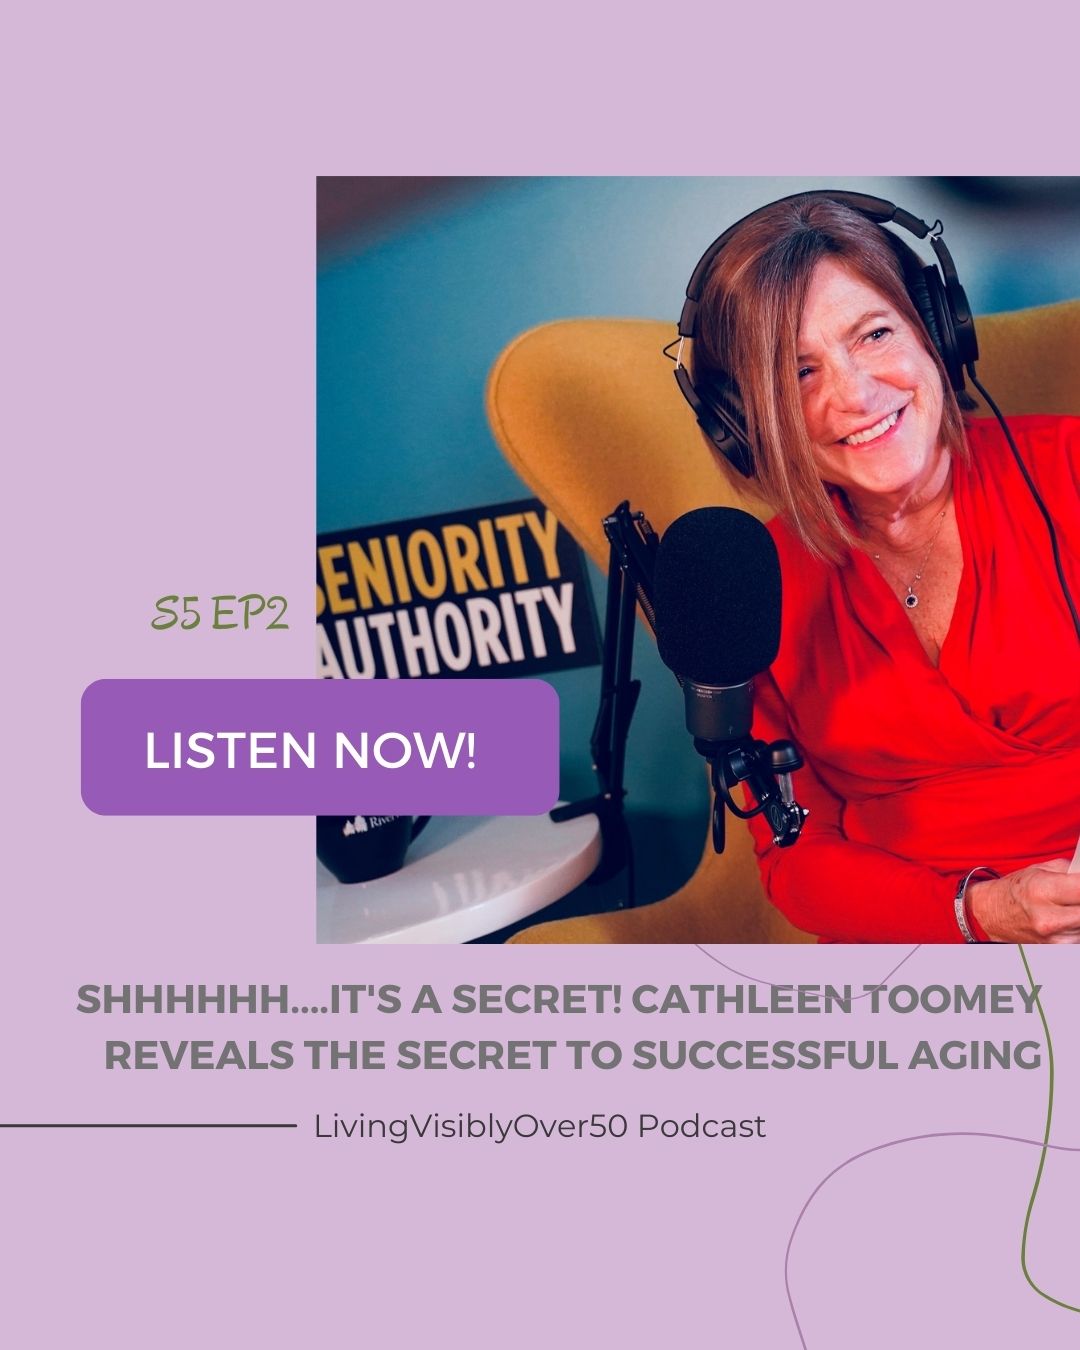 living visibly over 50 podcast - cathleen toomey - secret to successful aging